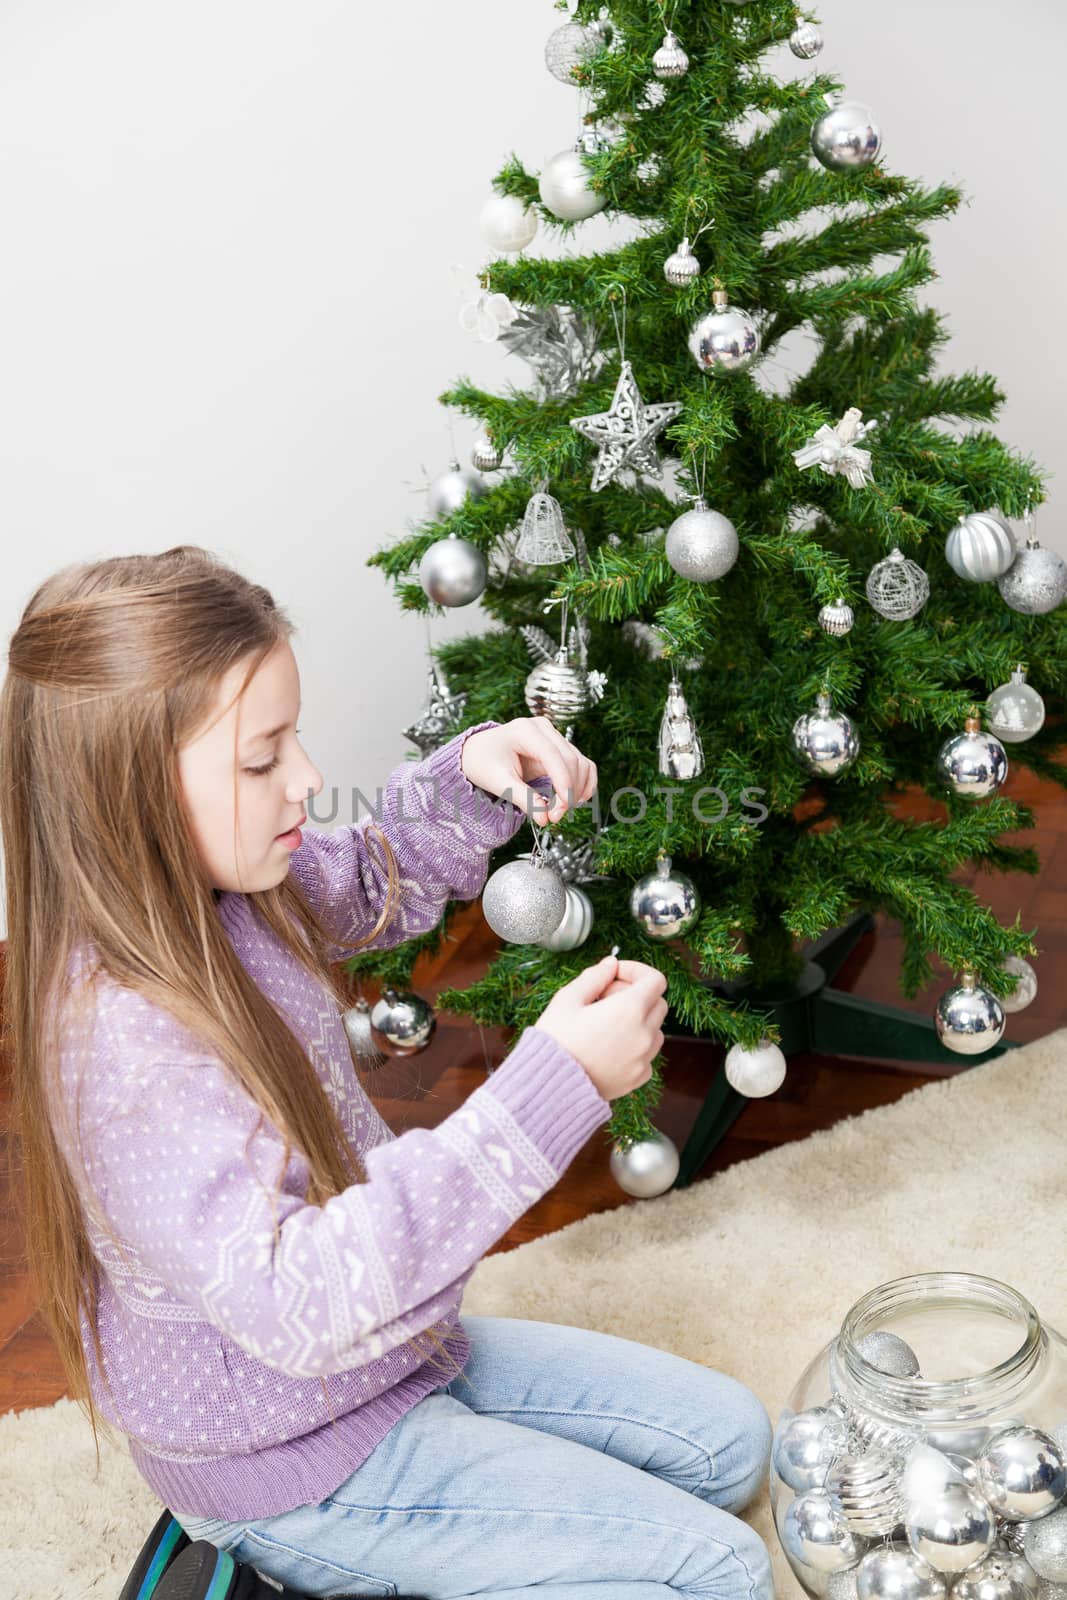 8-10, apartment, balls, bowl, carpet, caucasian, celebration, christmas, concentrated, cute, decoration, domestic, festive, festivity, girl, girls, hanging, hold, holding, holidays, home, house, leisure, life, lifestyle, little, living, merry, model, old, one, person, property, releases, room, santa, silver, time, tree, vertical, years